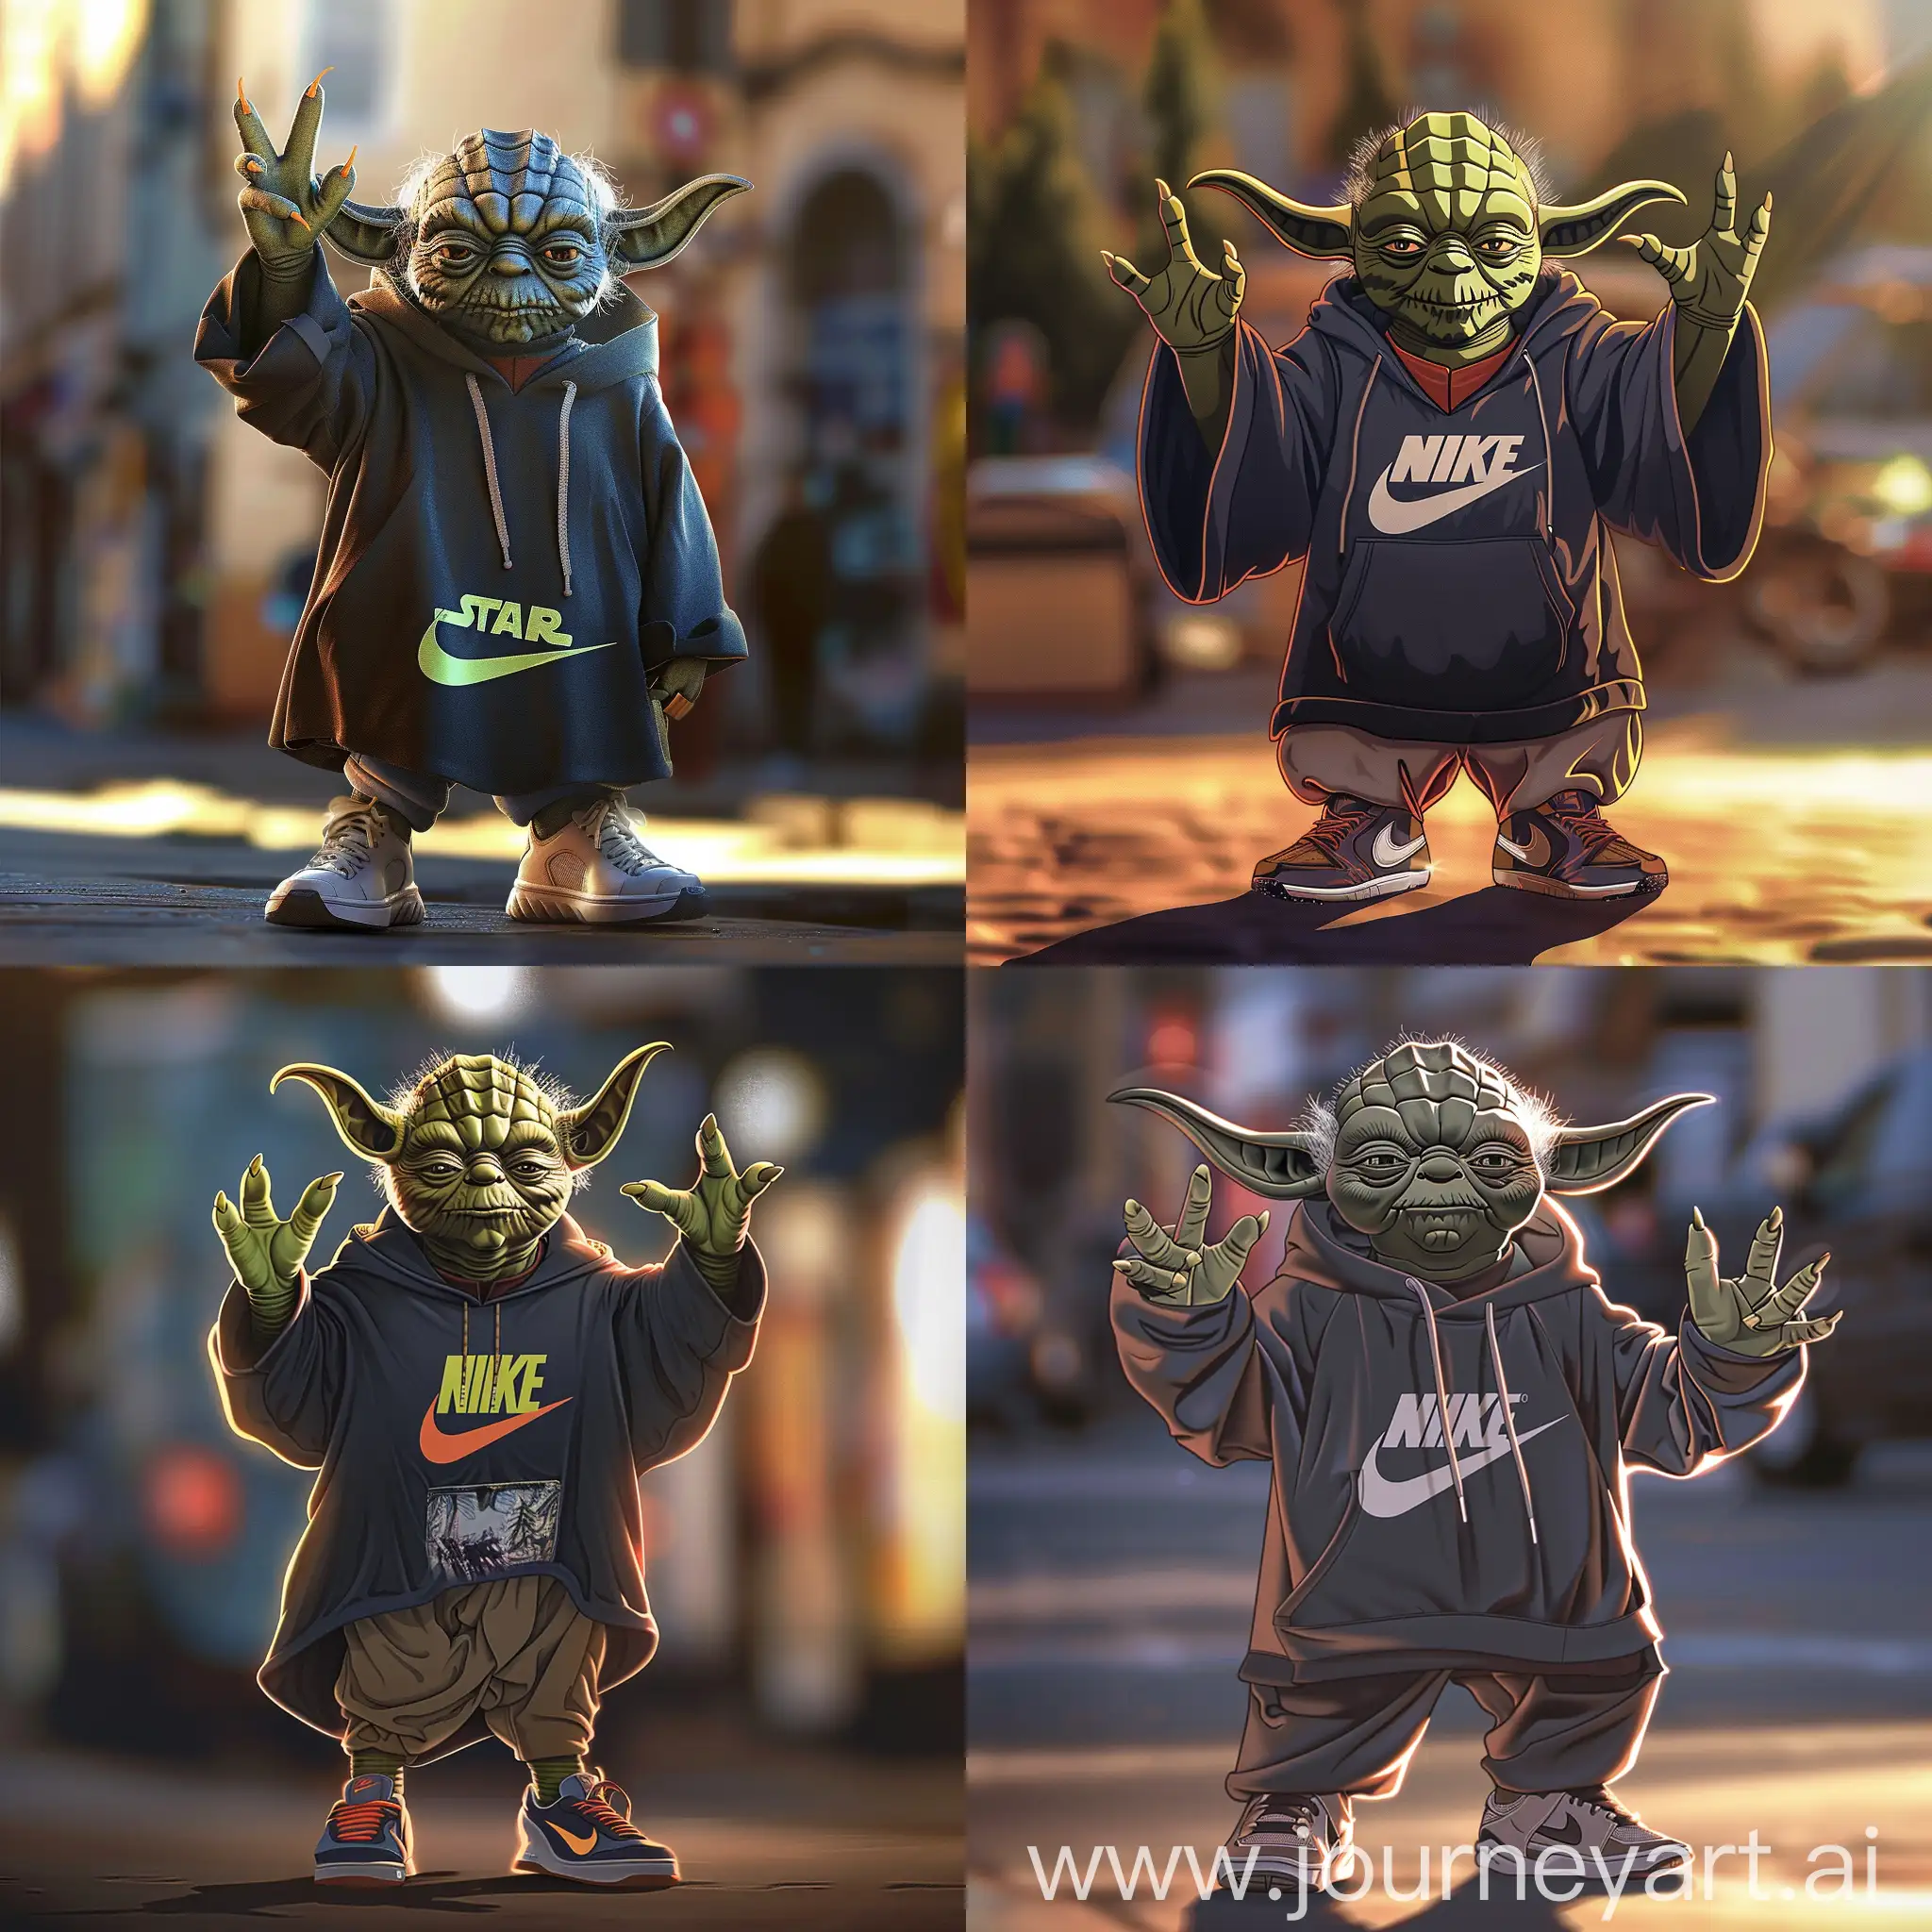 Create a detailed, cartoon-style image of Yoda from Star Wars, reimagined with a modern twist. Yoda is posed standing confidently, holding up four fingers in a bold, assertive gesture. He wears a sleek, dark Nike hoodie that has the iconic Nike swoosh prominently displayed in a contrasting color. On his feet, Yoda sports a pair of stylish Nike sneakers that complement his outfit. His expression is serious yet cool, exuding a gangster-like vibe. The background is a blurred urban scene that enhances Yoda's streetwise appearance. The overall look combines the mystical aura of Star Wars with contemporary street fashion, portraying Yoda in a light never seen before.